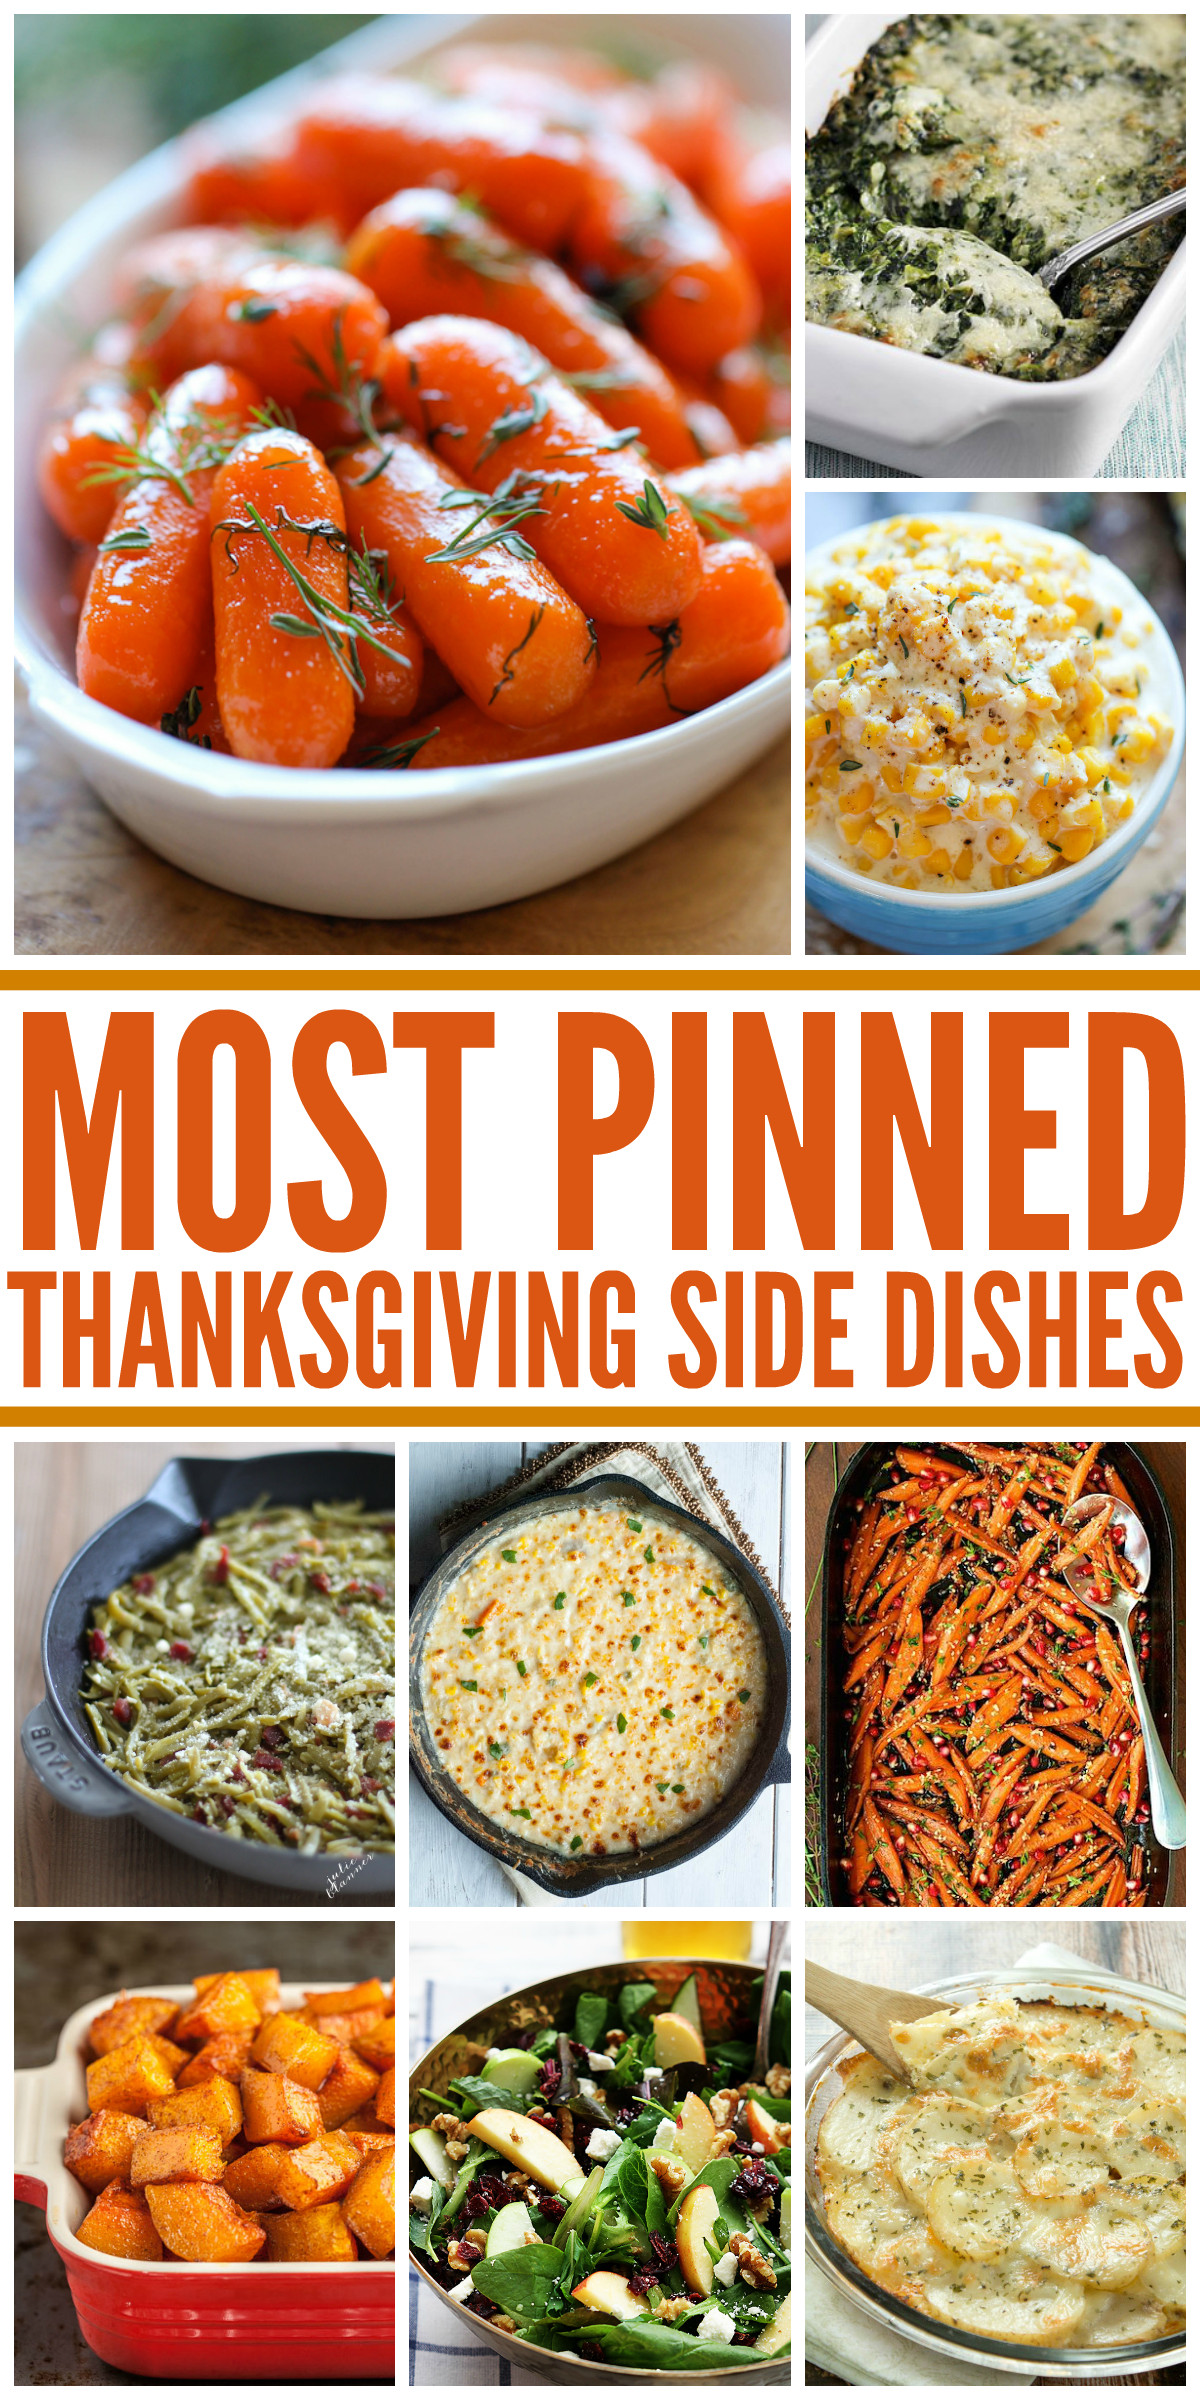 Side Dishes Thanksgiving
 25 Most Pinned Side Dish Recipes for Thanksgiving and